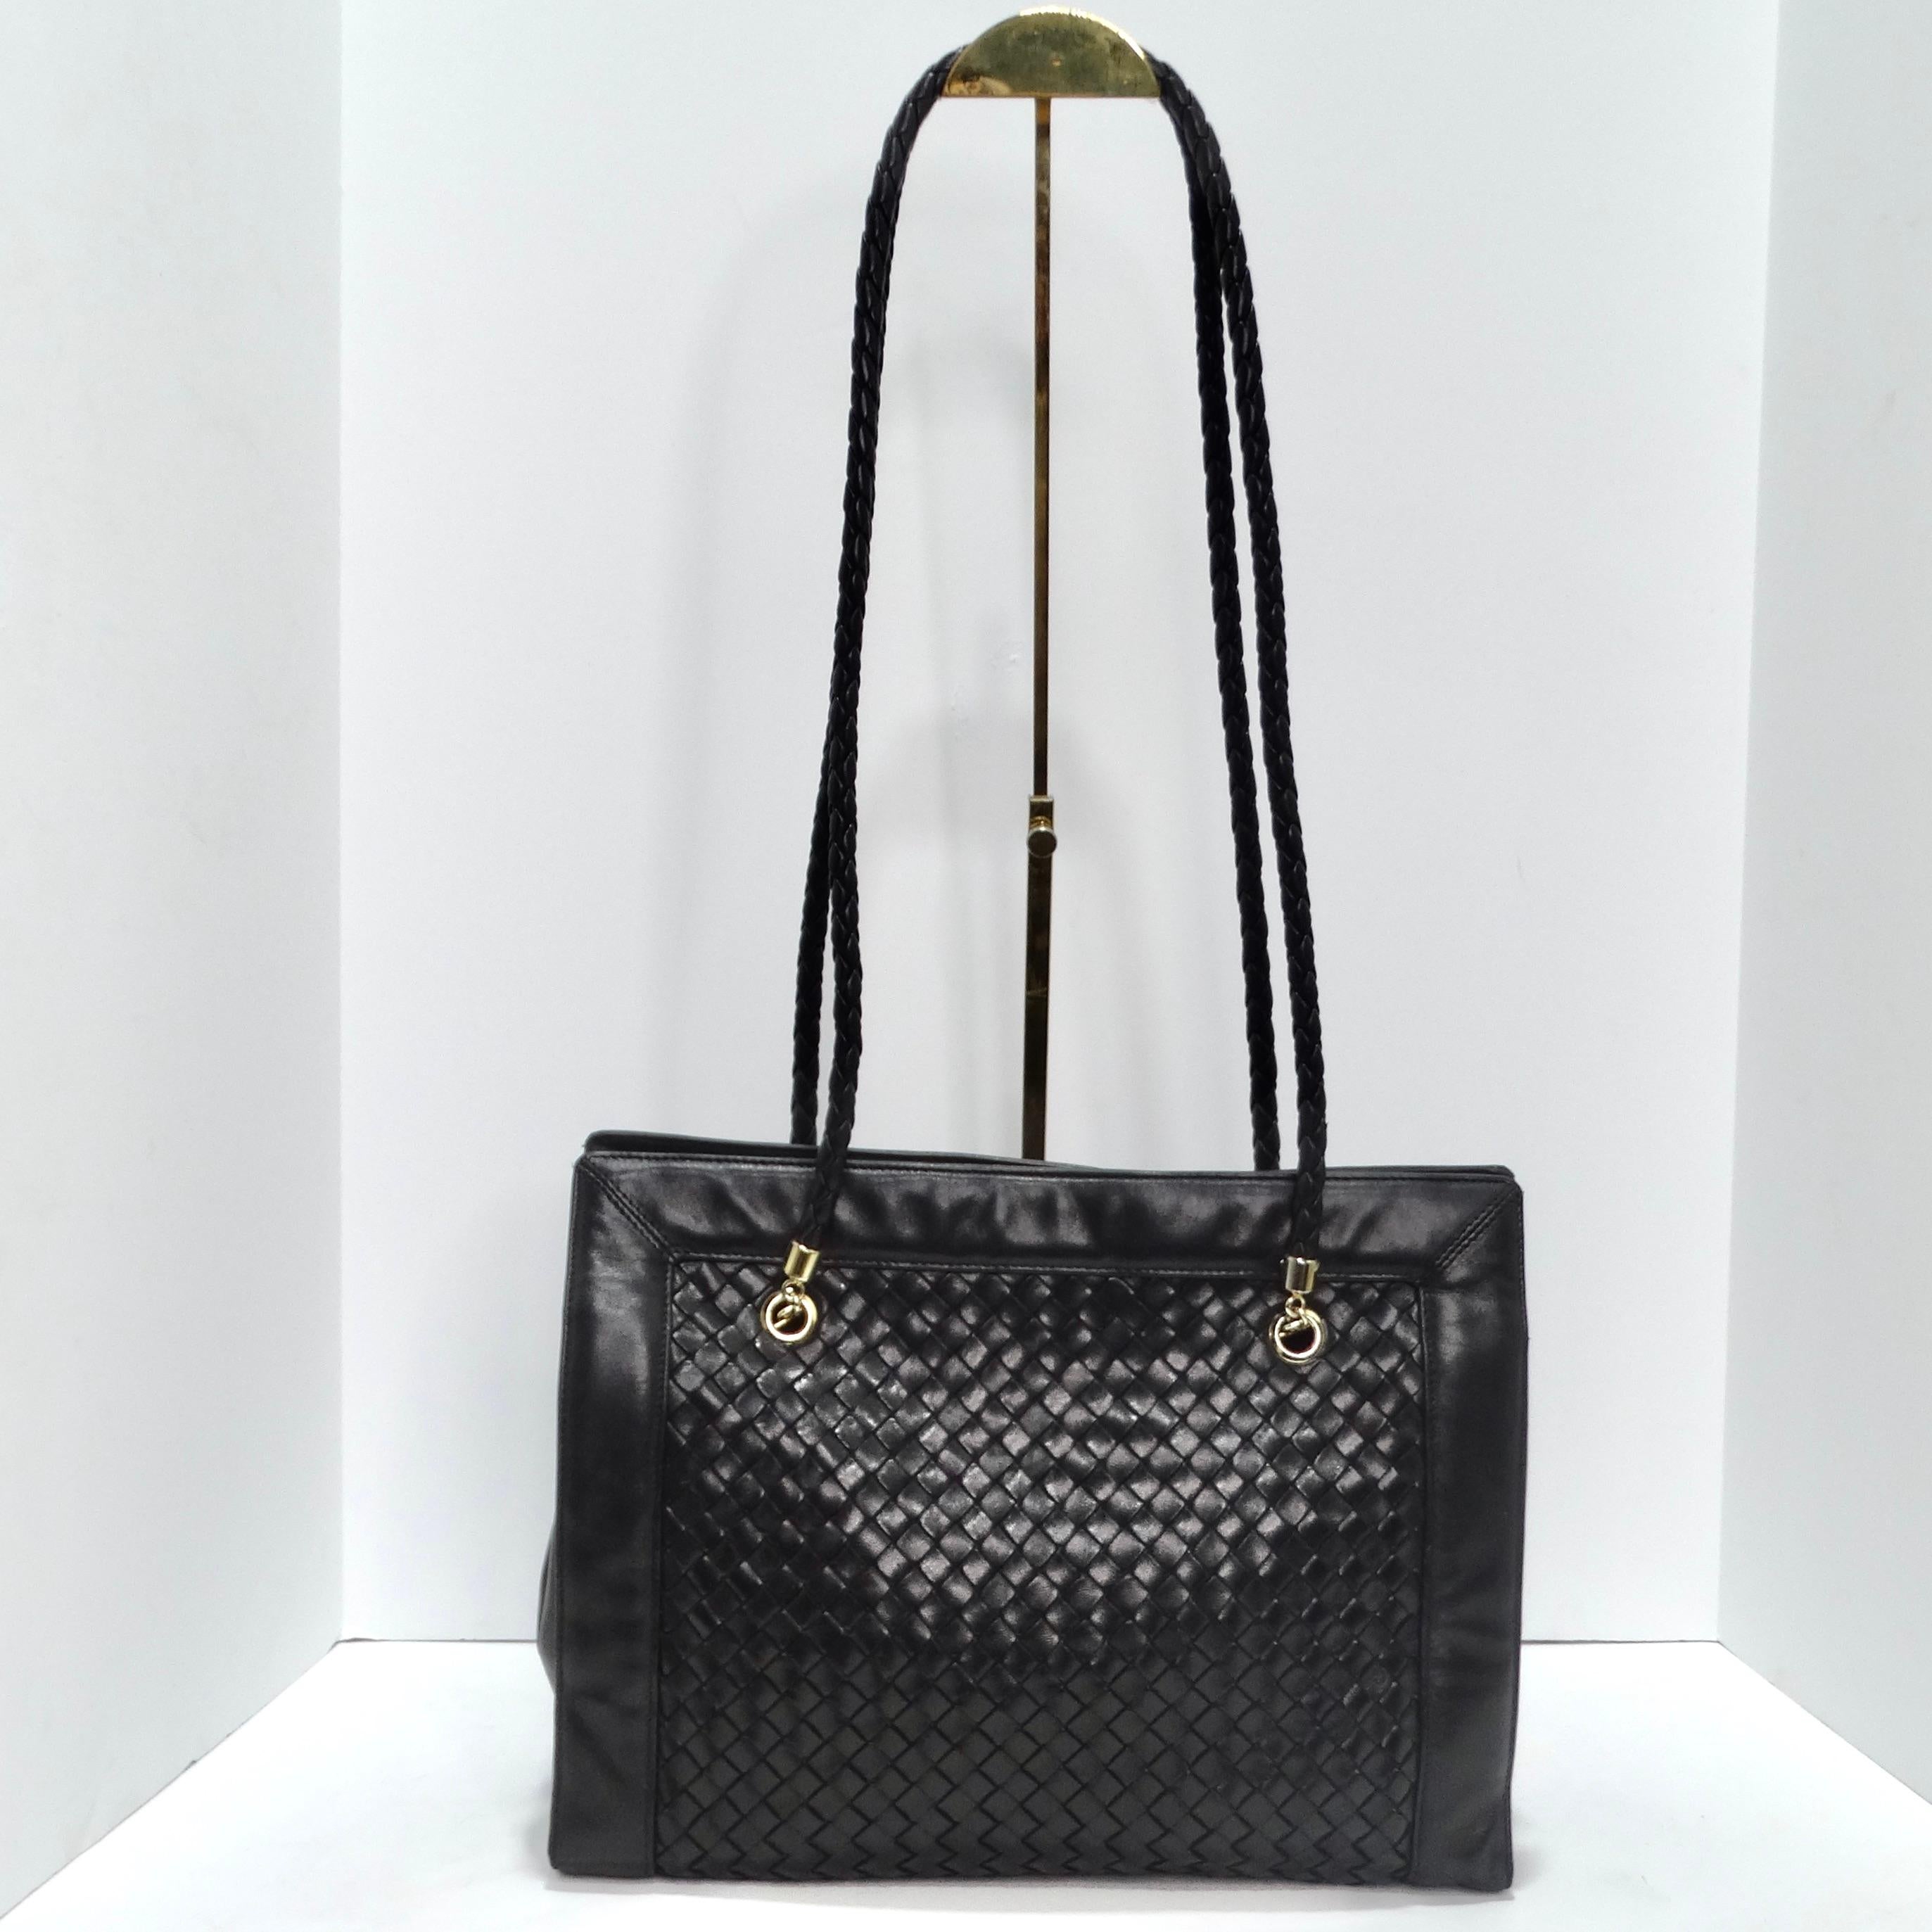 Get your hands on the Bottega Veneta 1980s Black Leather Woven Handbag – a classic and timeless accessory that effortlessly combines sophistication with the artisanal craftsmanship for which Bottega Veneta is renowned. This handbag is a testament to